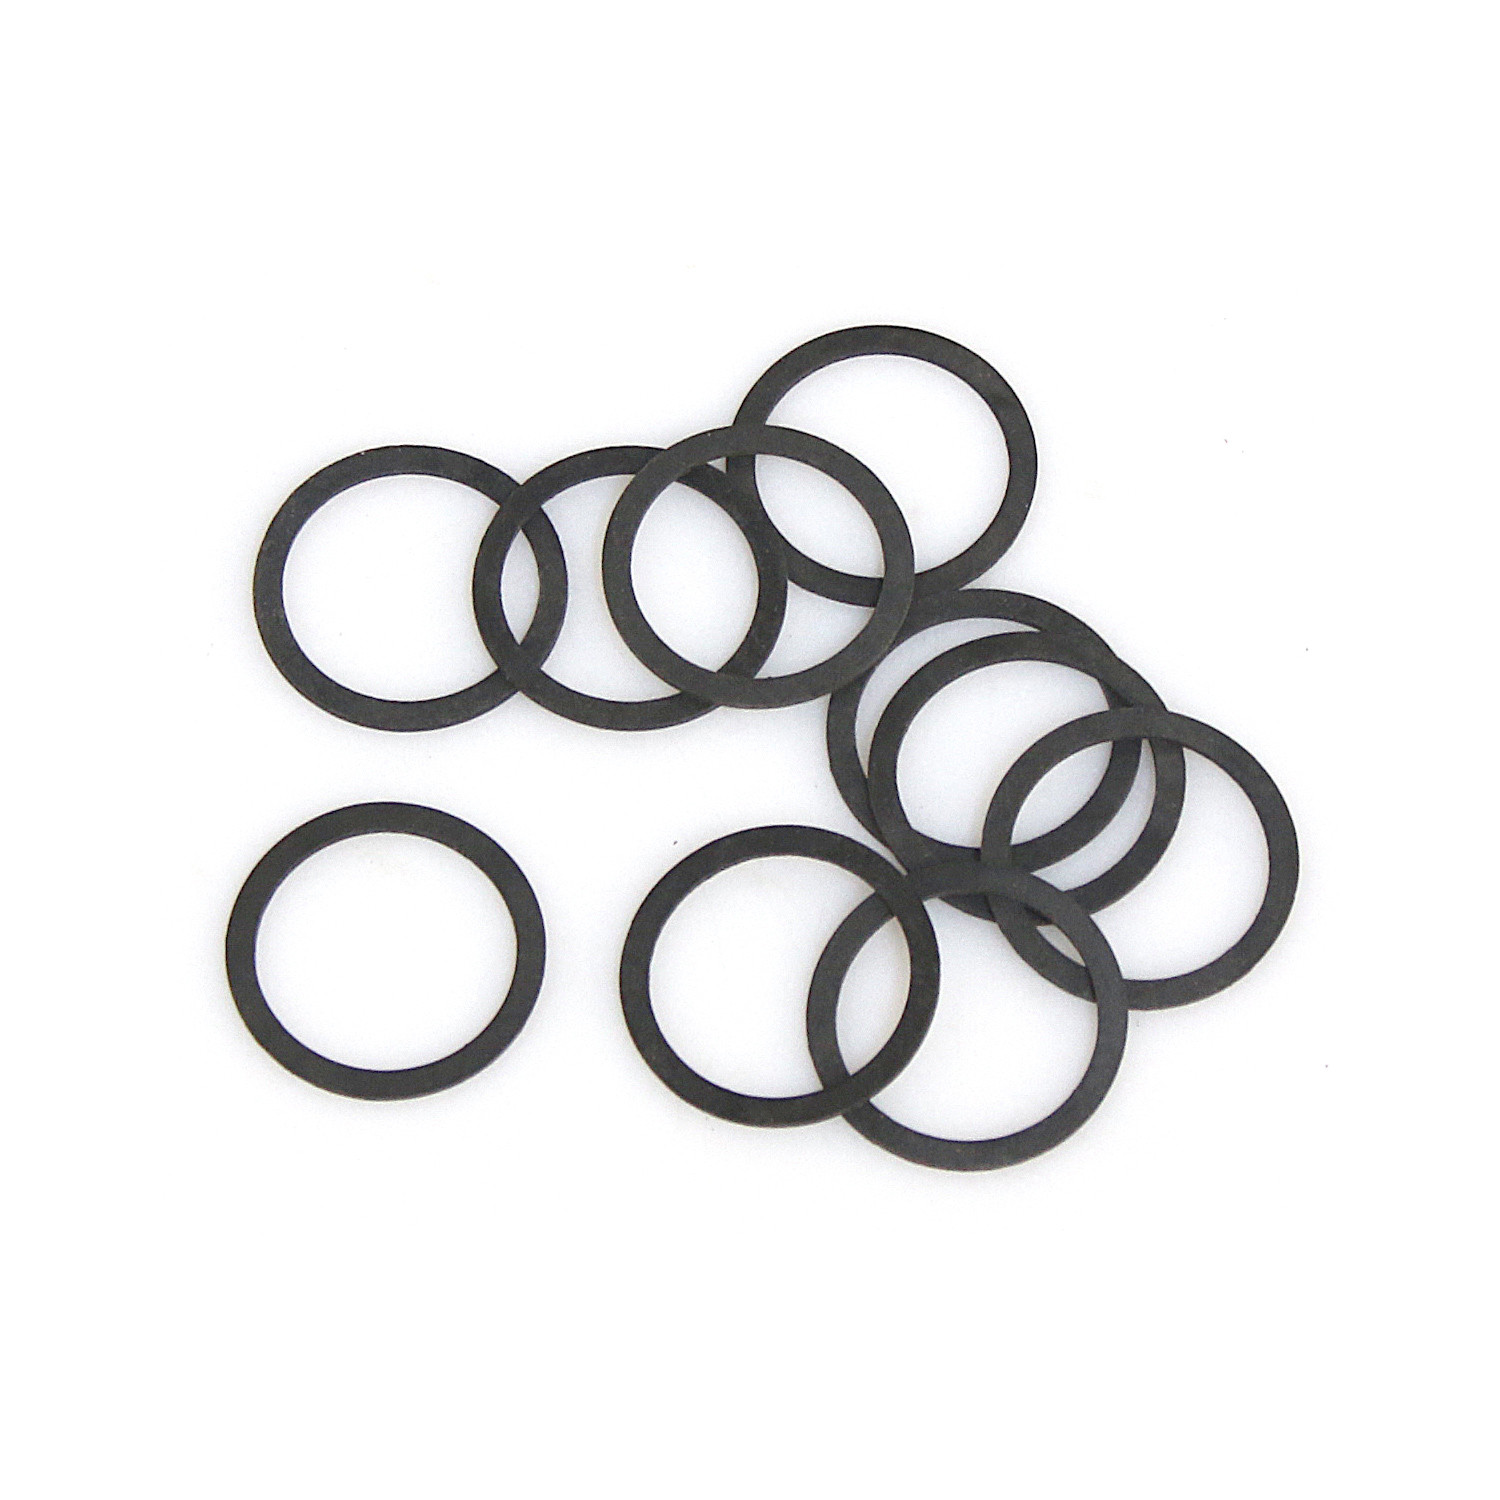 BAG OF 10 WASHERS 18,6x6x6